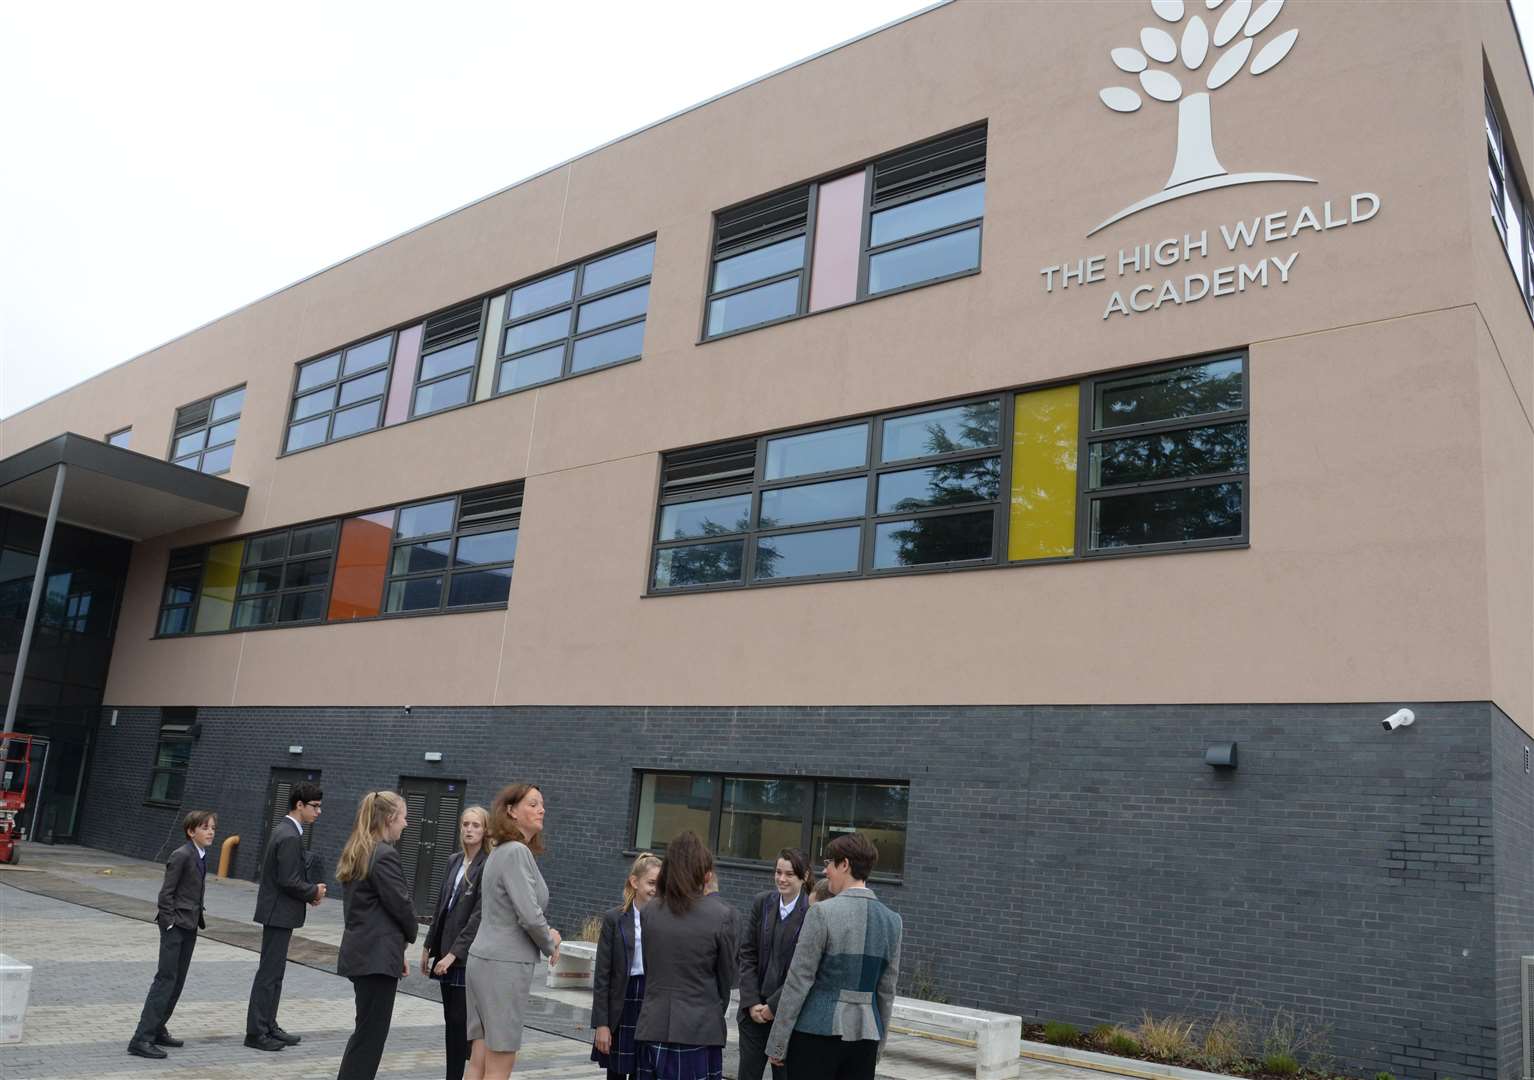 Cranbrook lost its non-selective secondary school when High Weald Academy closed